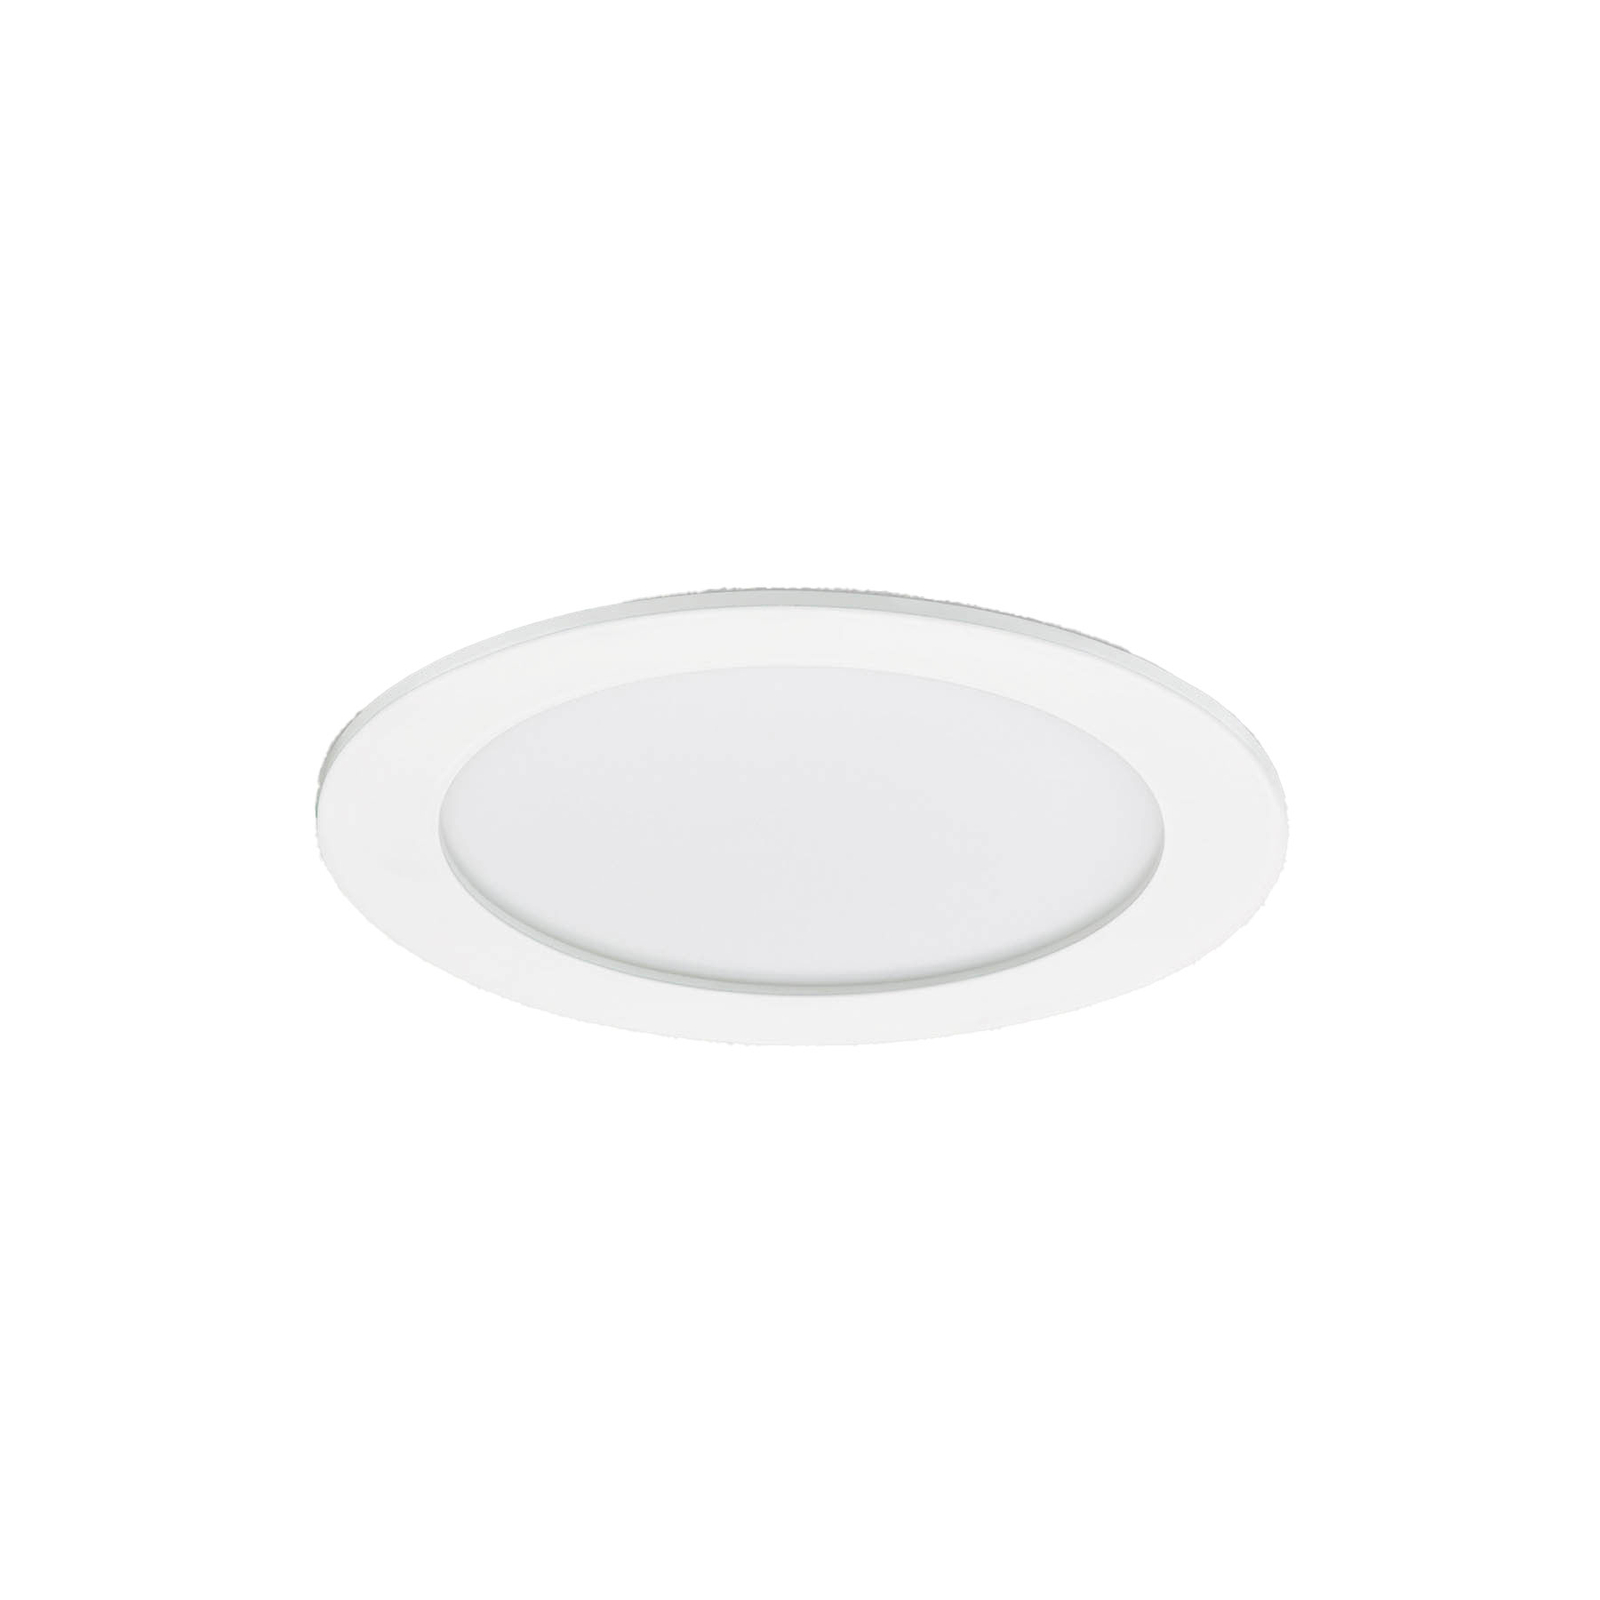 LED recessed downlight DN145B LED10S/830 PSU II WH